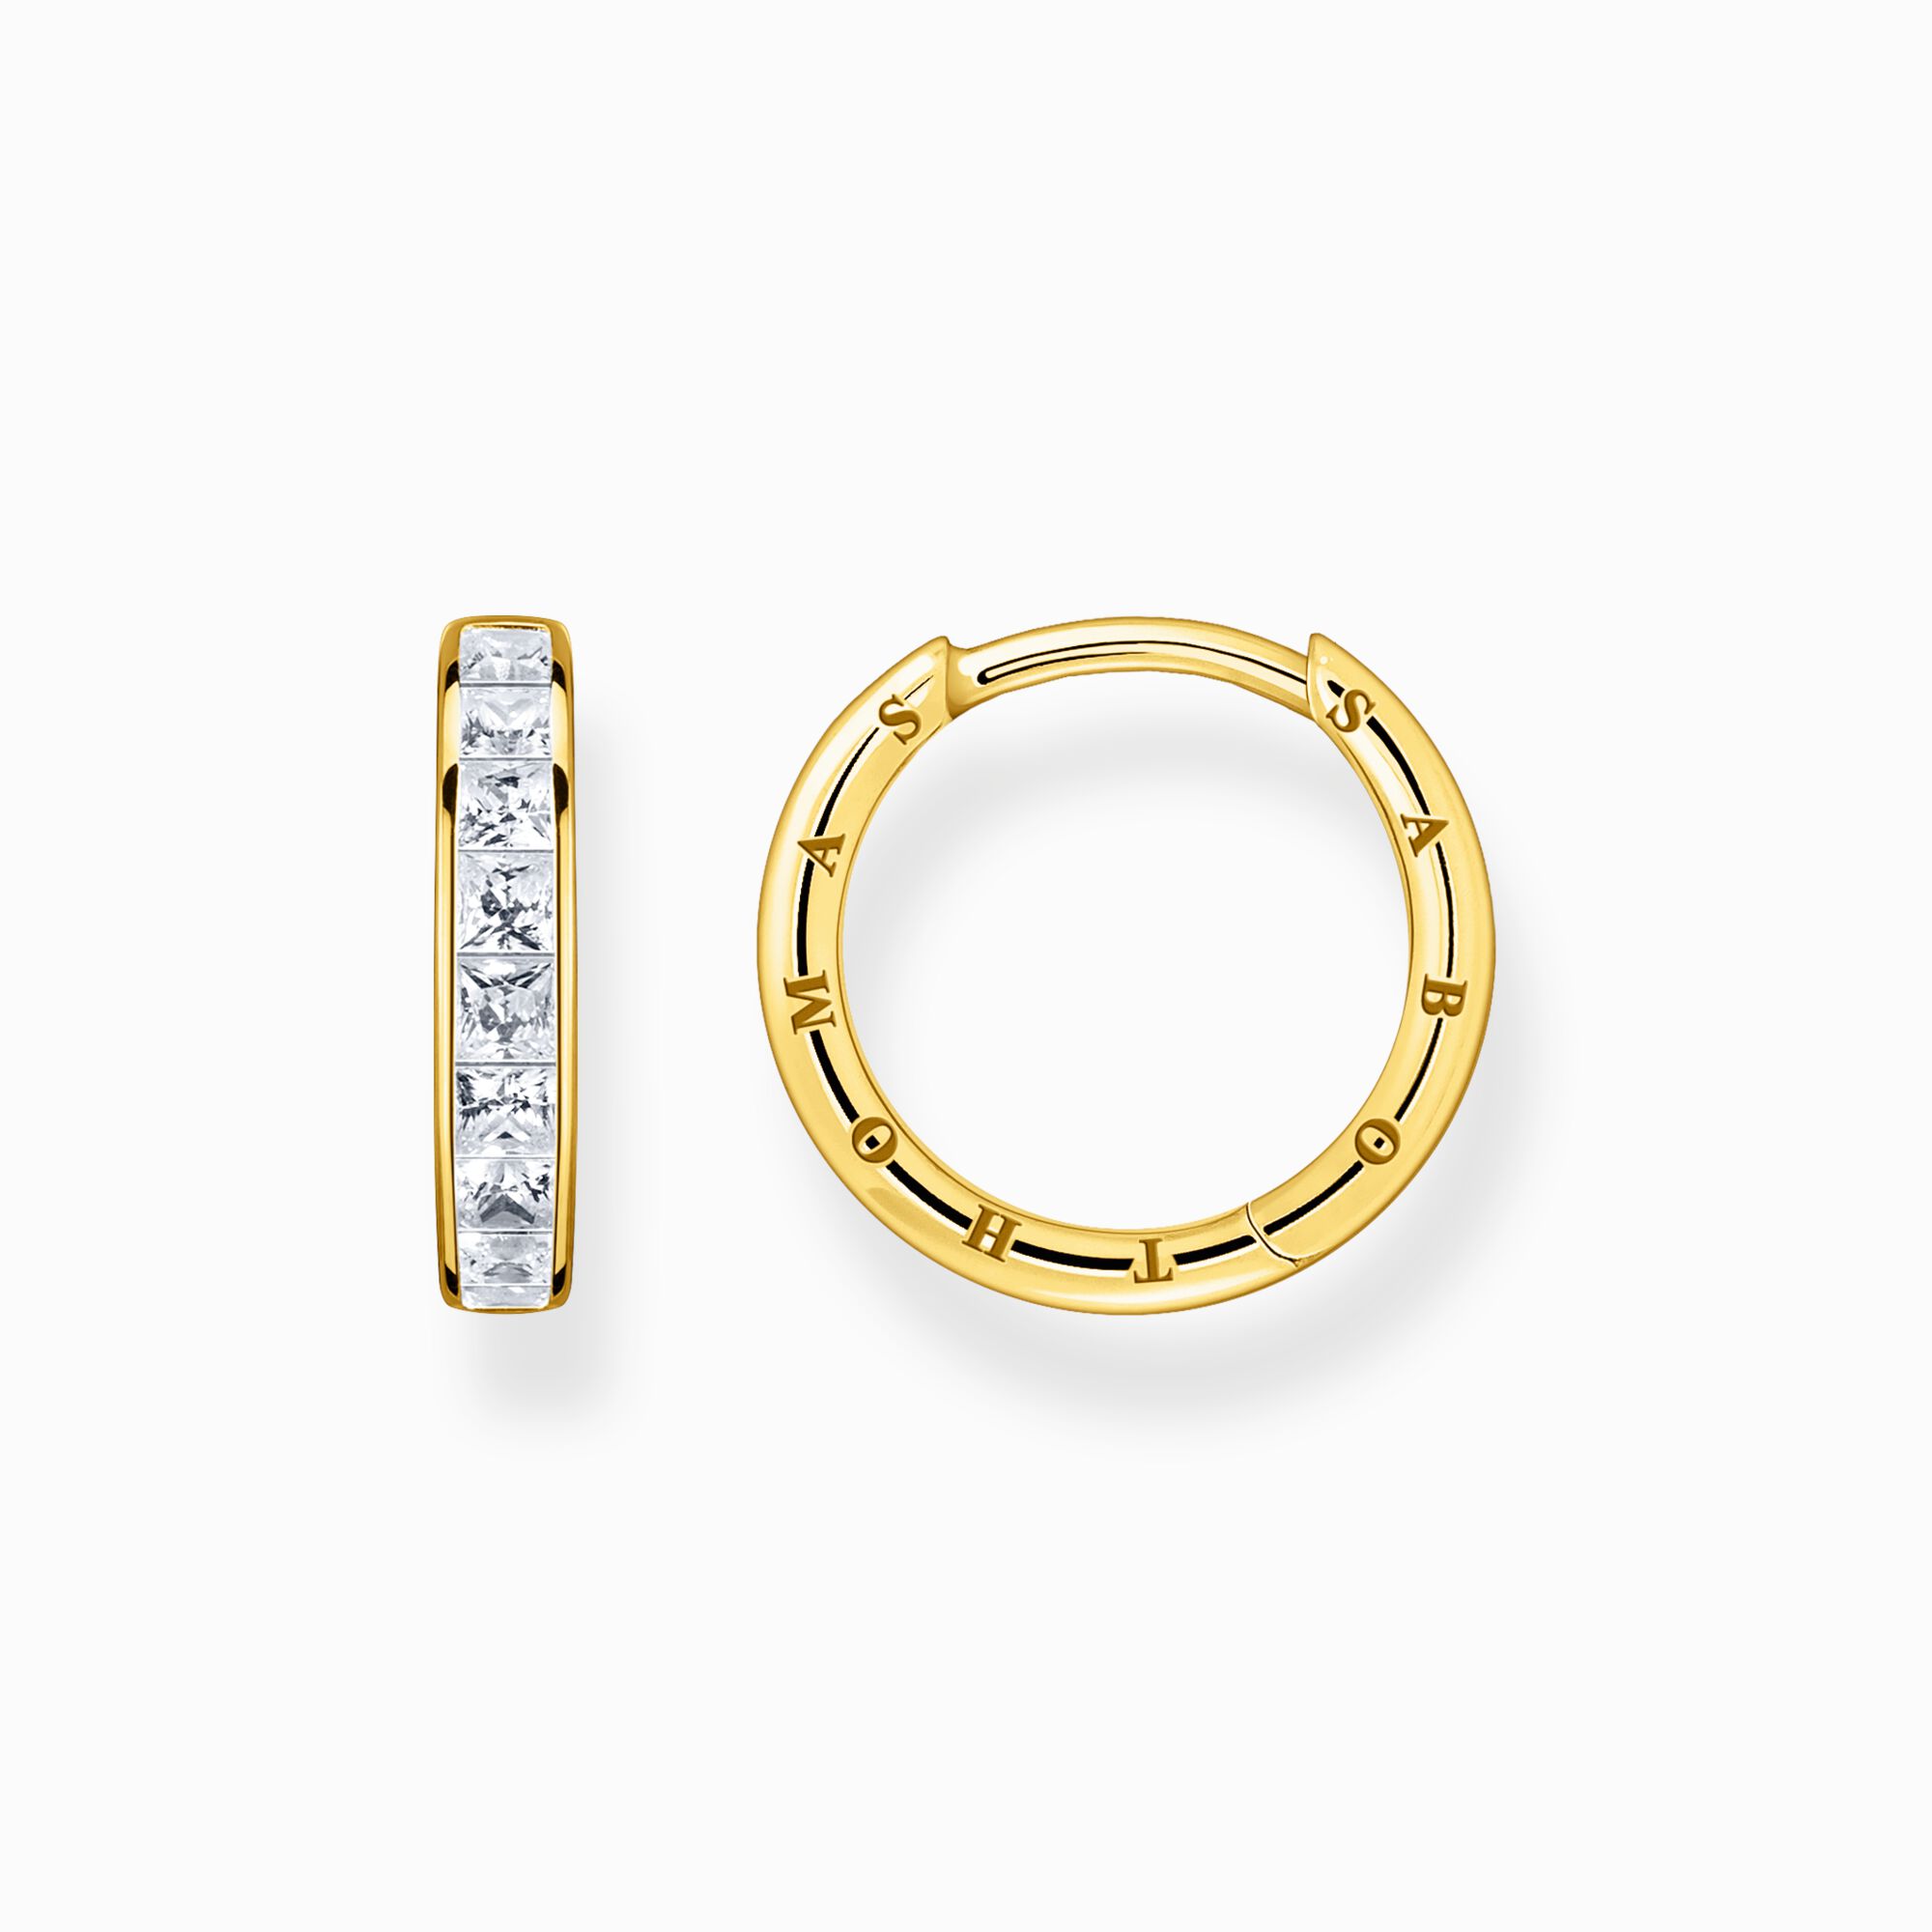 Hoop earrings with white stones pav&eacute; gold plated from the  collection in the THOMAS SABO online store